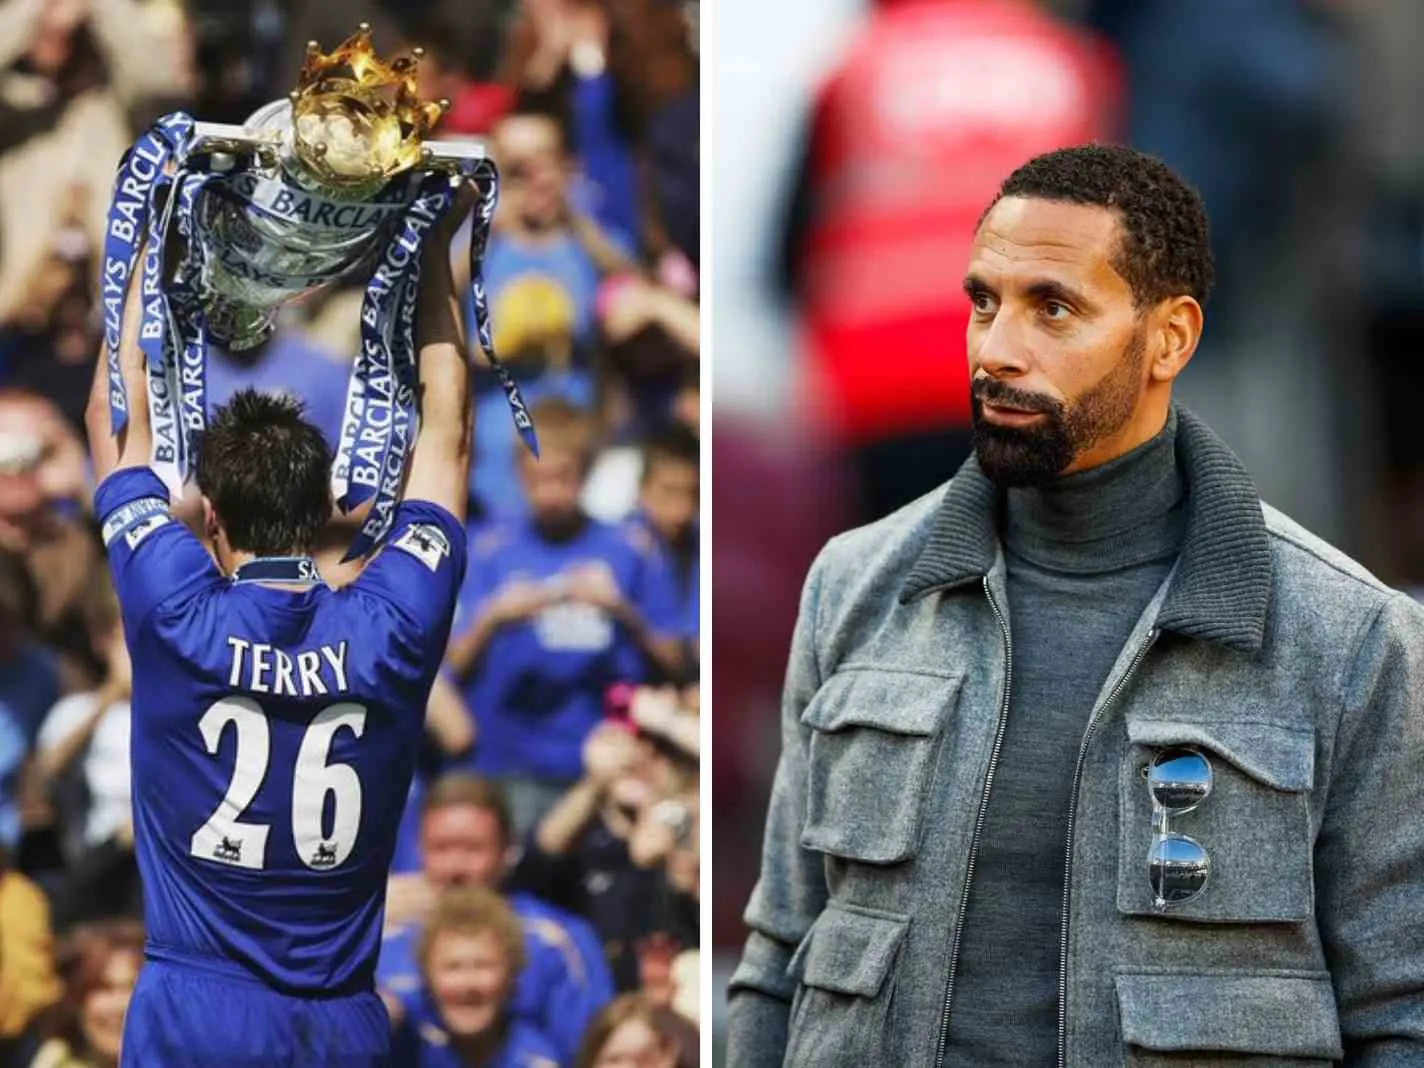 A two photo collage featuring John Terry lifting Premier League trophy and Rio Ferdinand in casual attire.